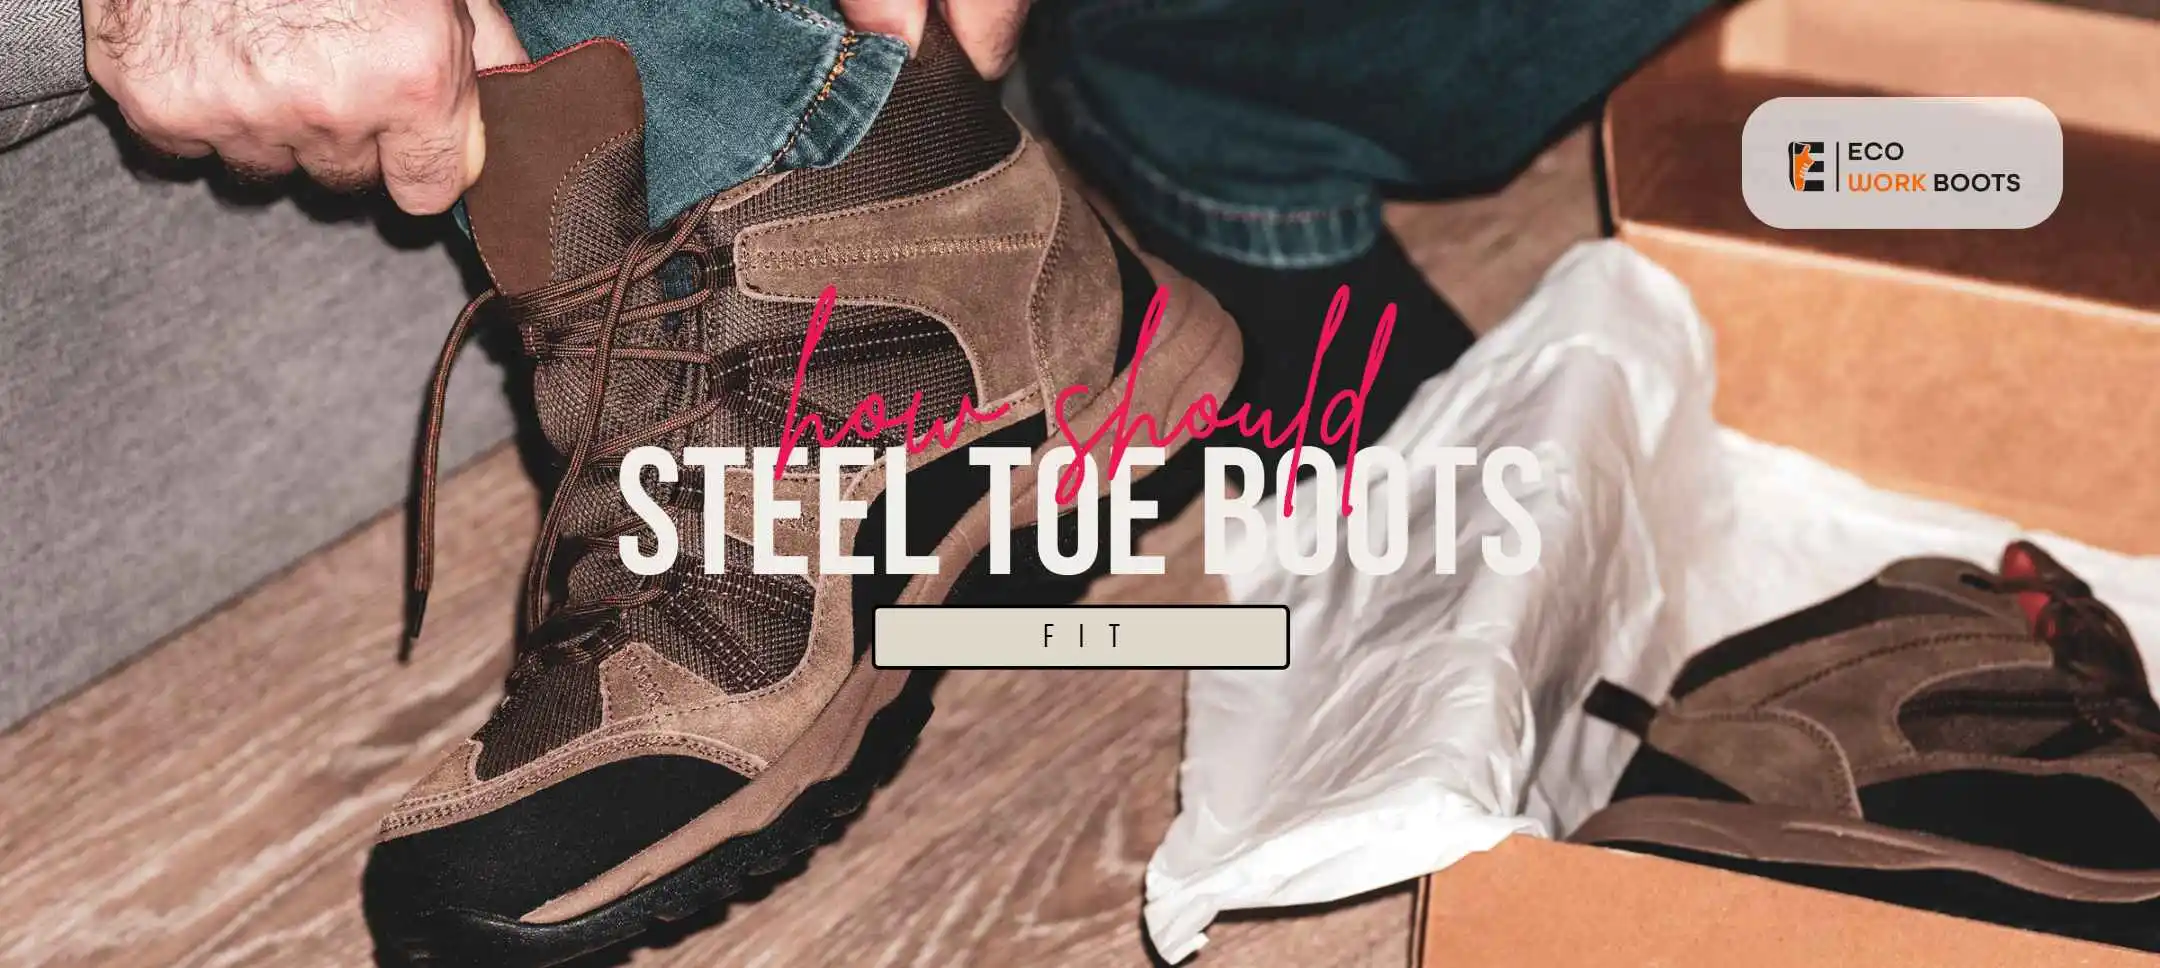 how should steel toe boots fit